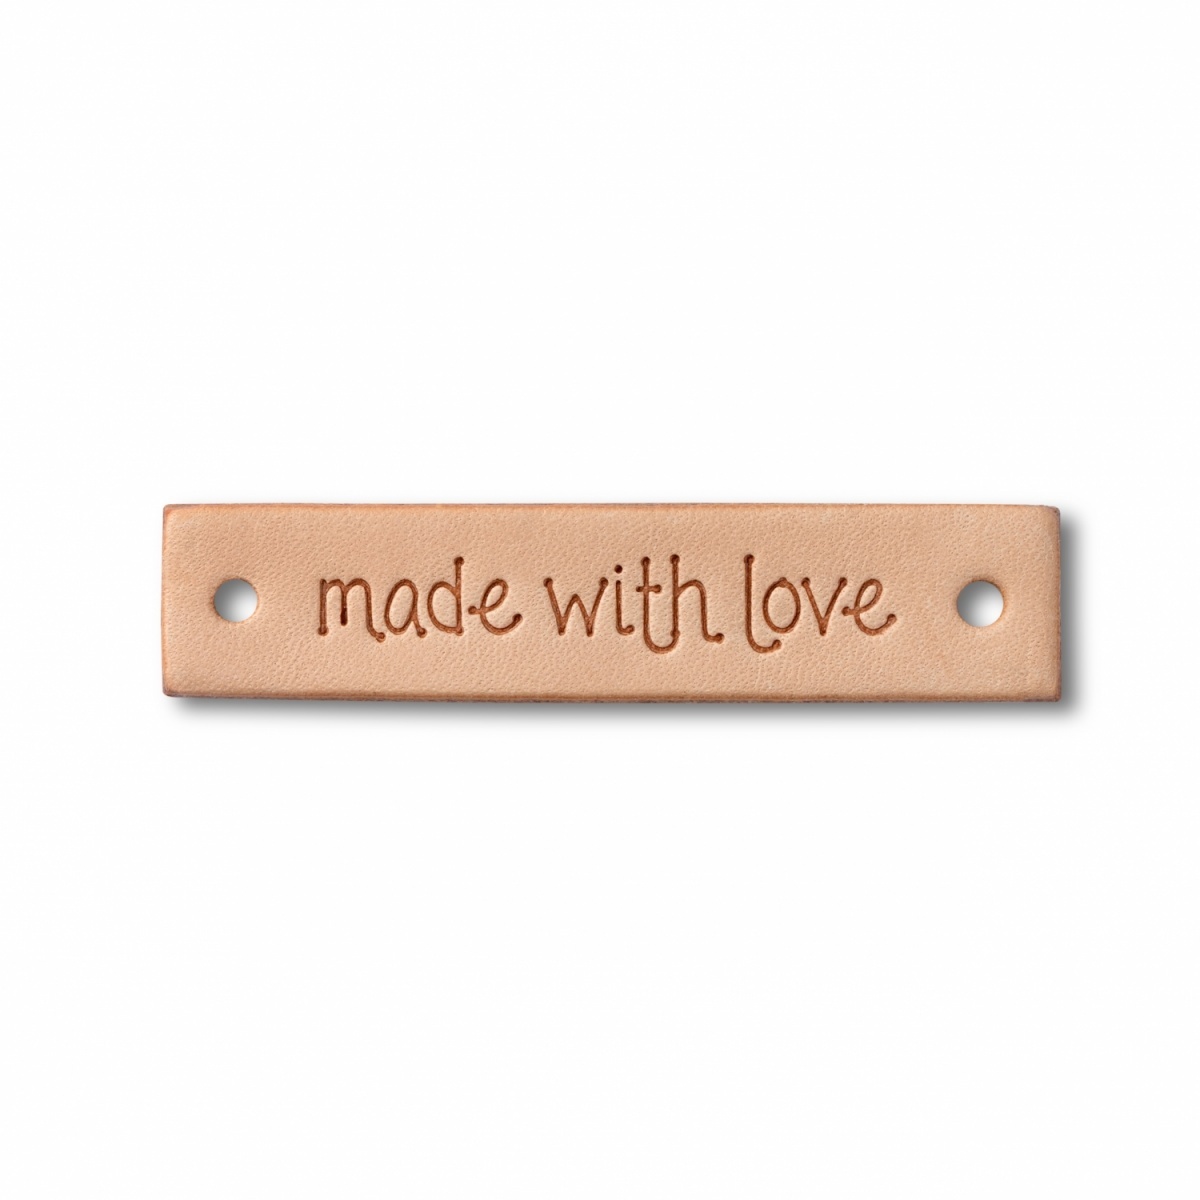 Label "made with love", leather natural, rectangular фото 1